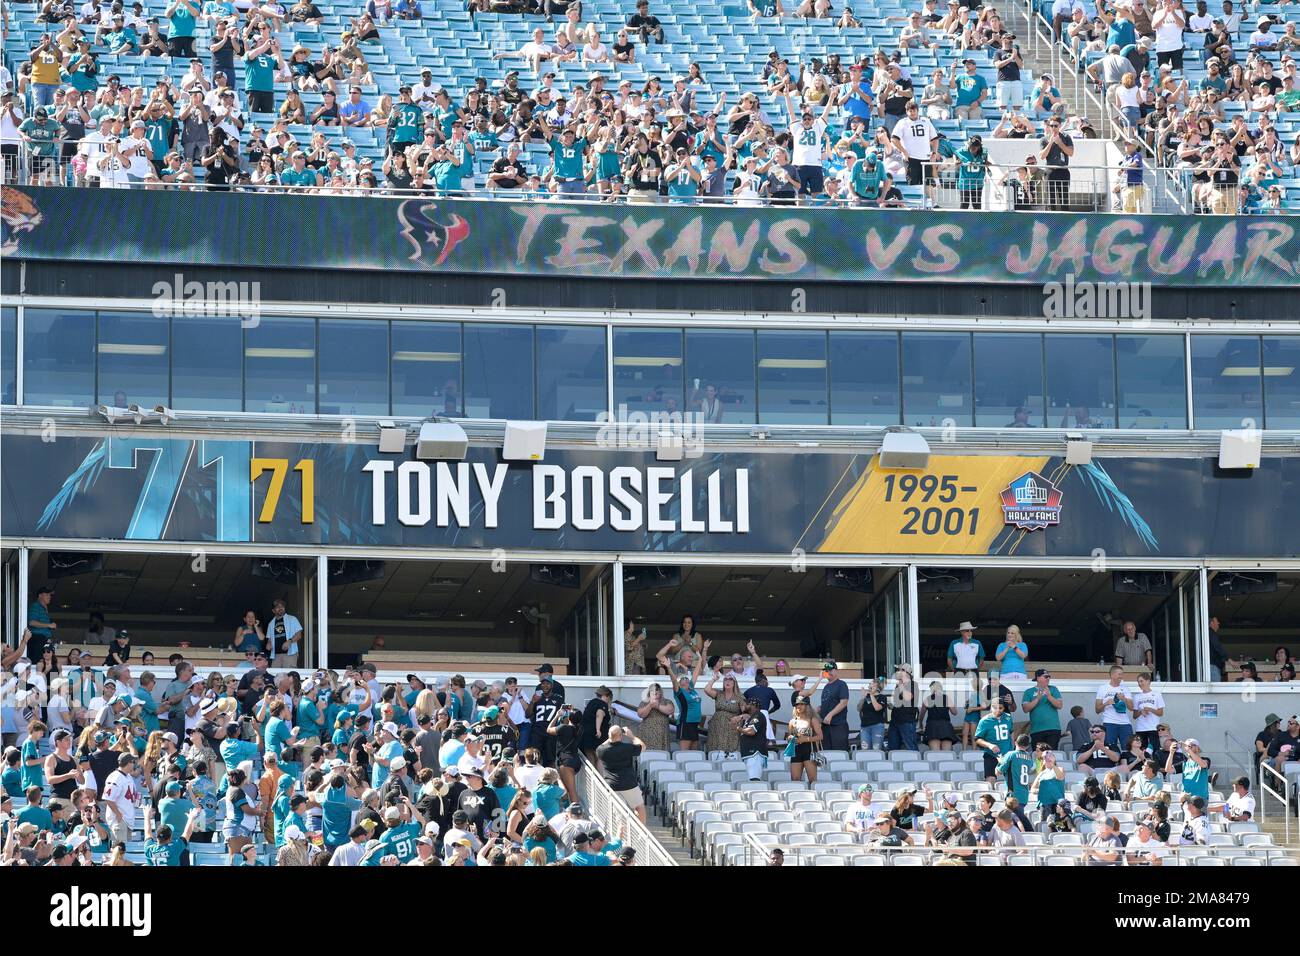 Former Jacksonville Jaguars offensive tackle Tony Boselli has his